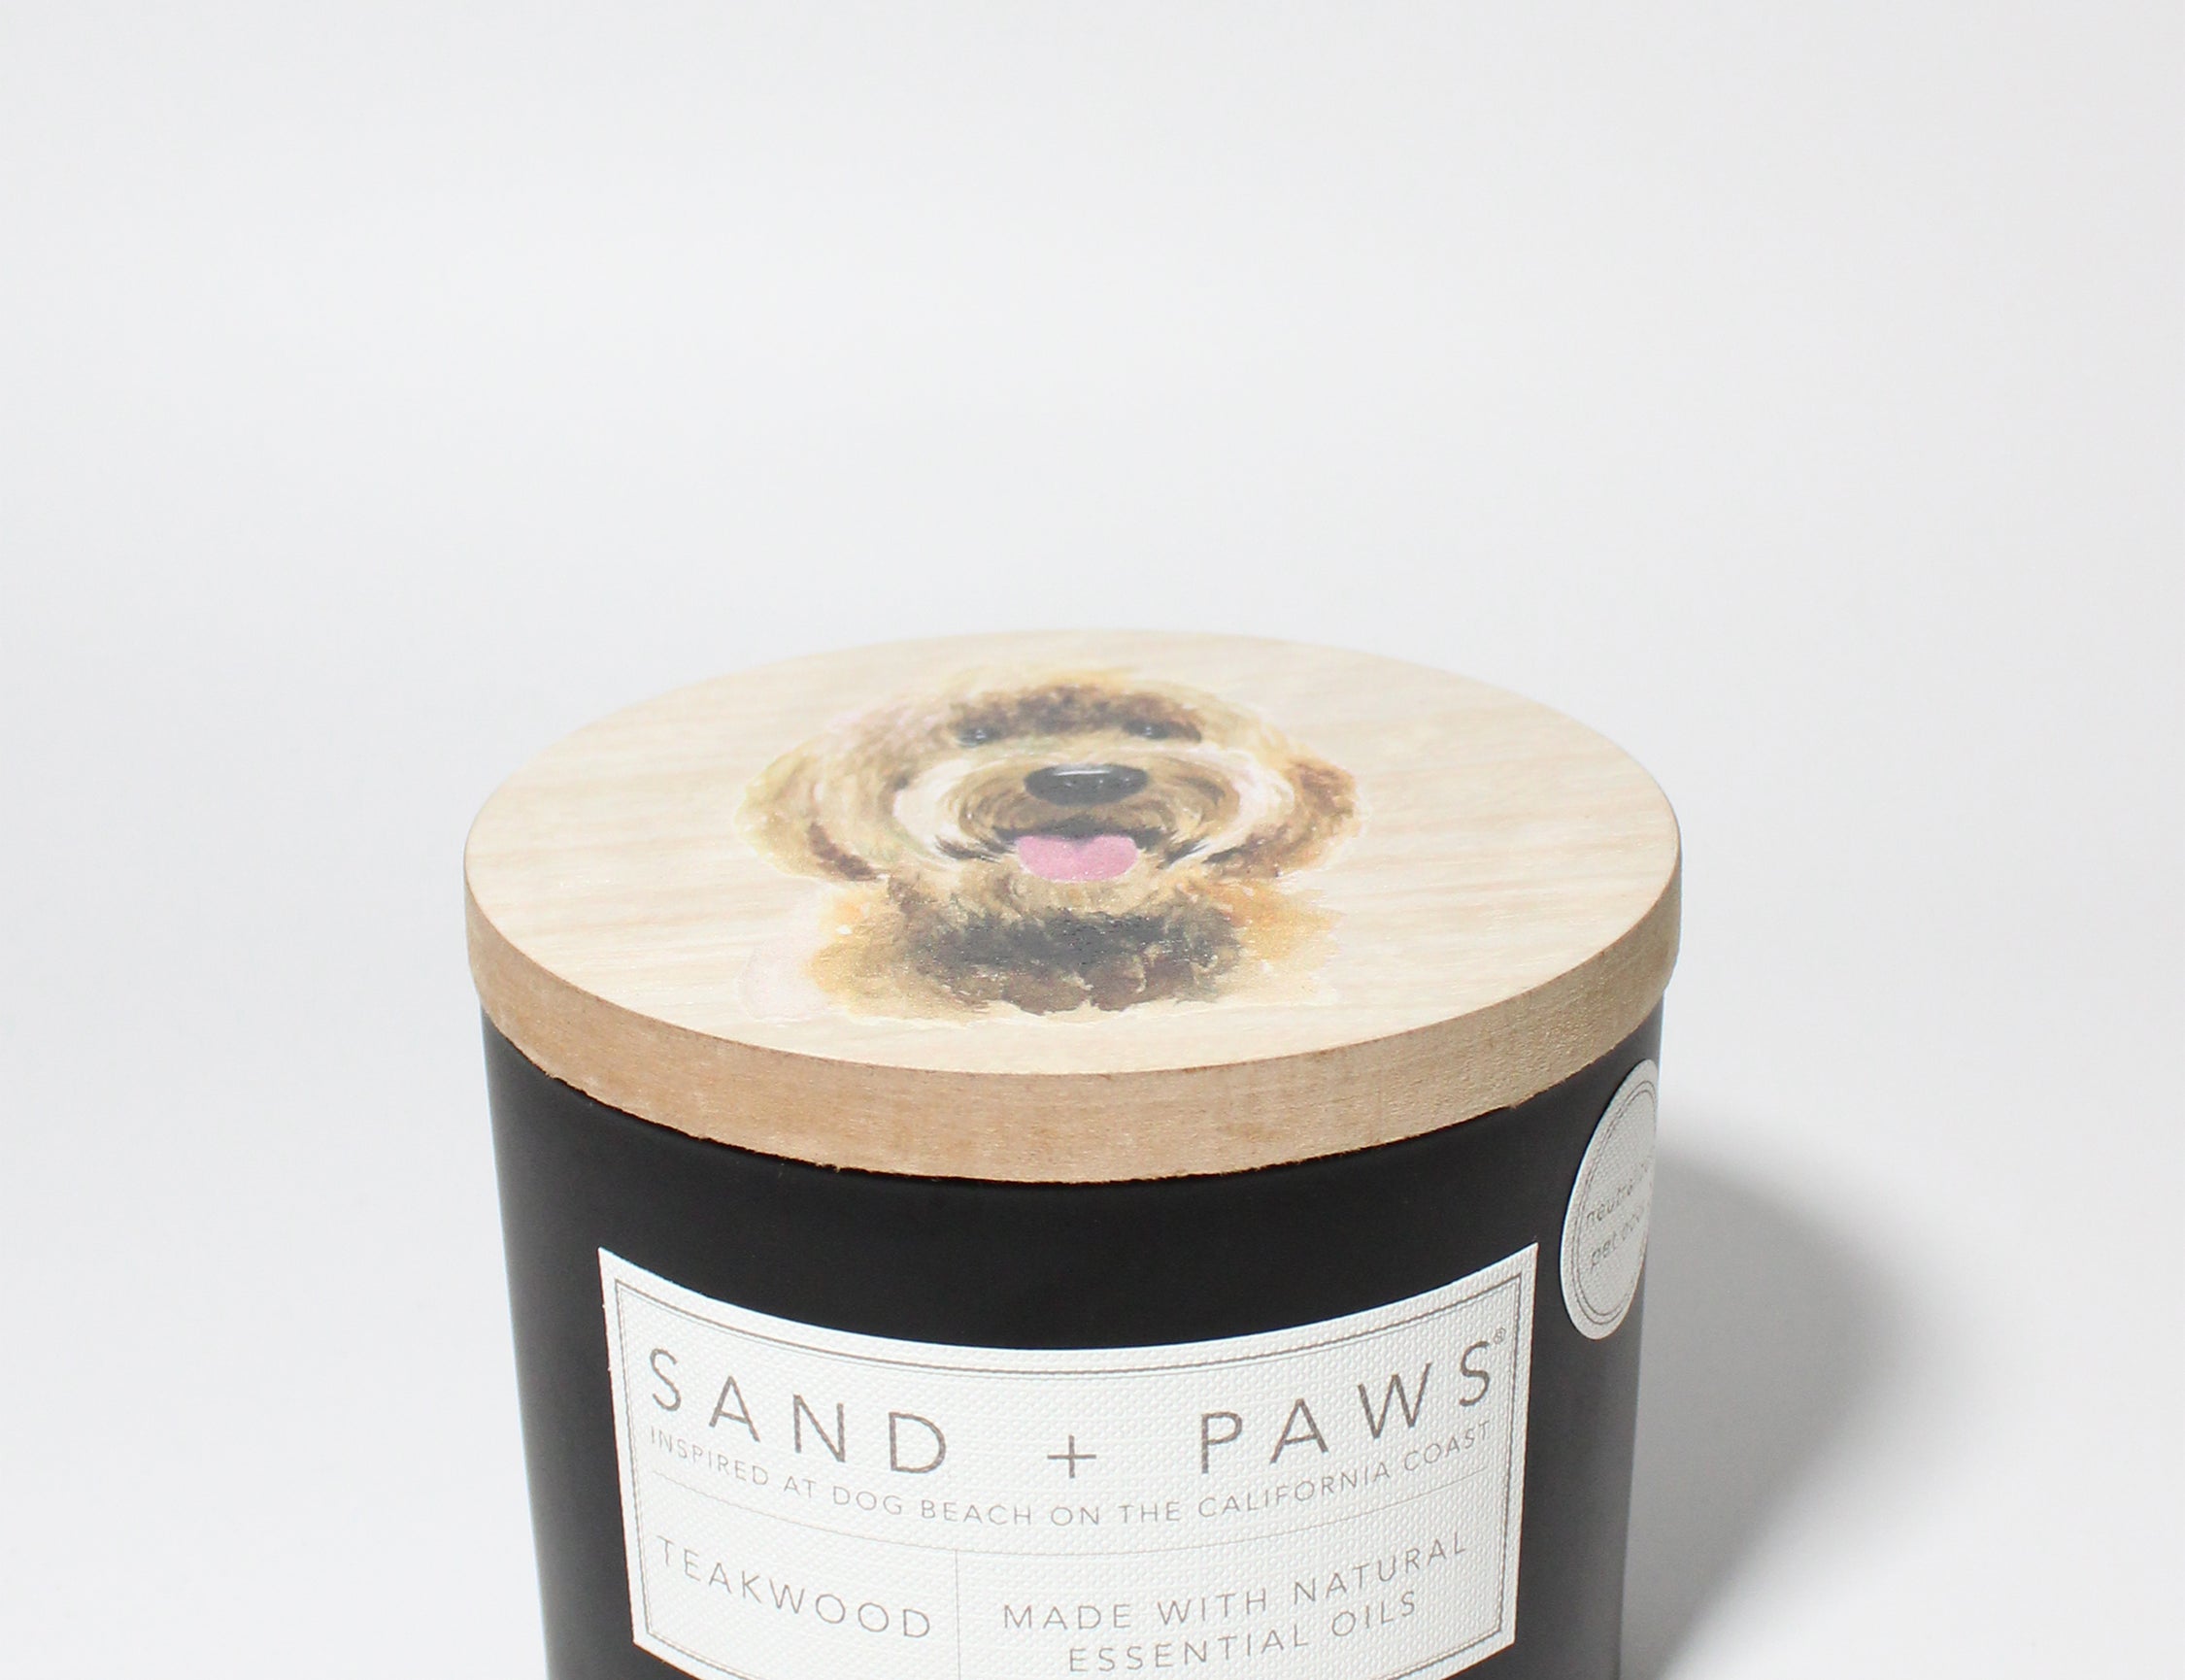 Sand + Paws Teakwood 12 oz scented candle Black vessel with Painted Doodle lid